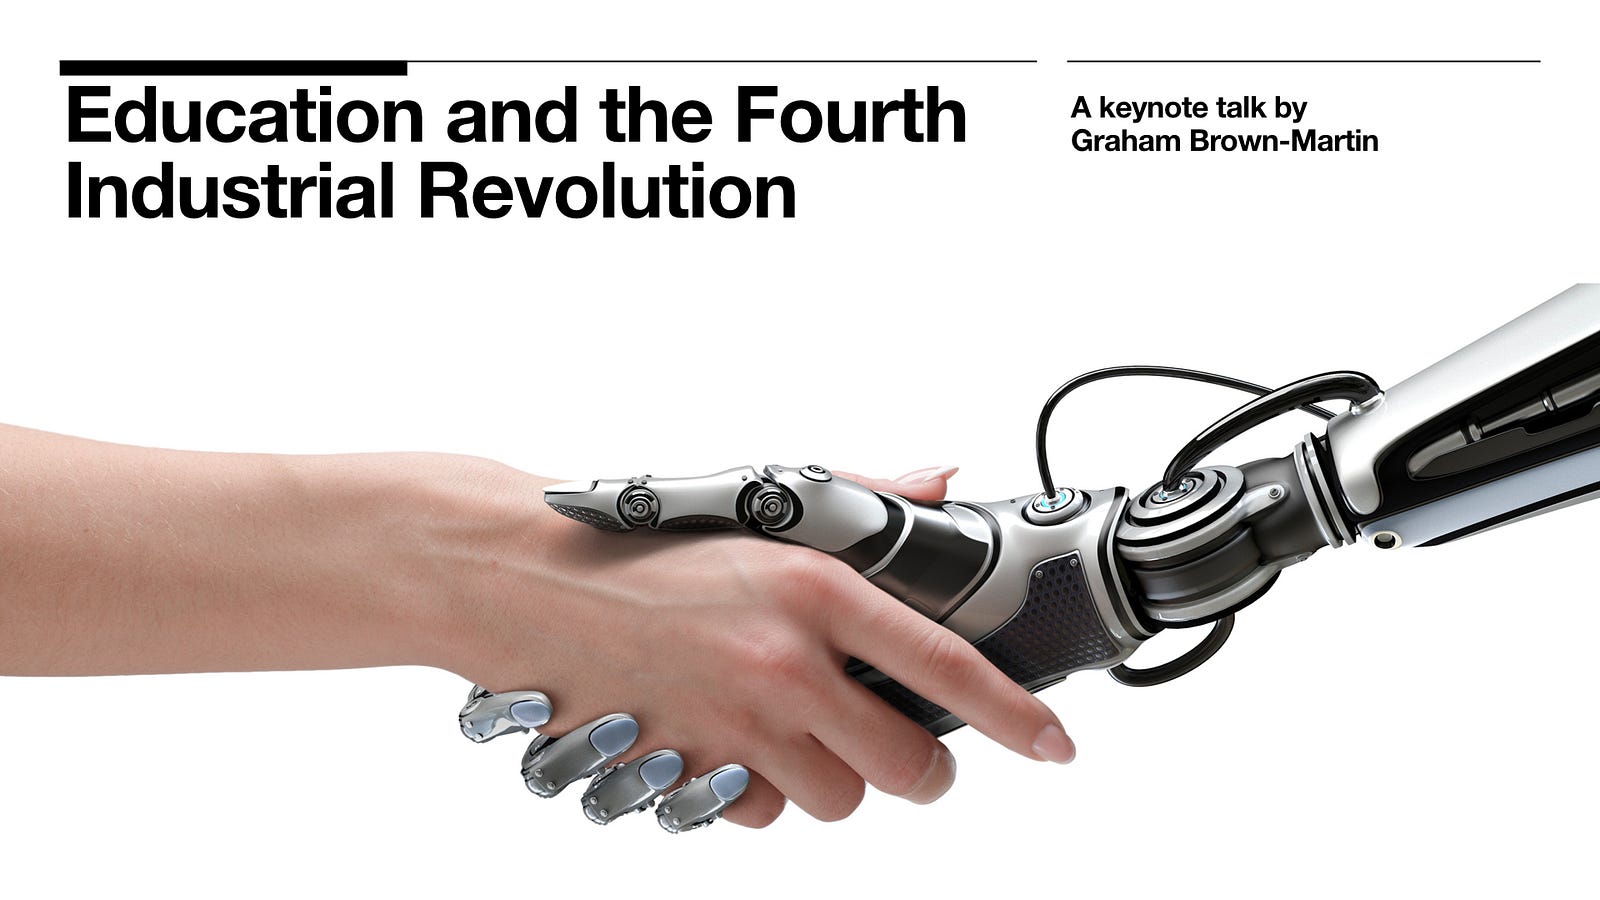 4th industrial revolution and education